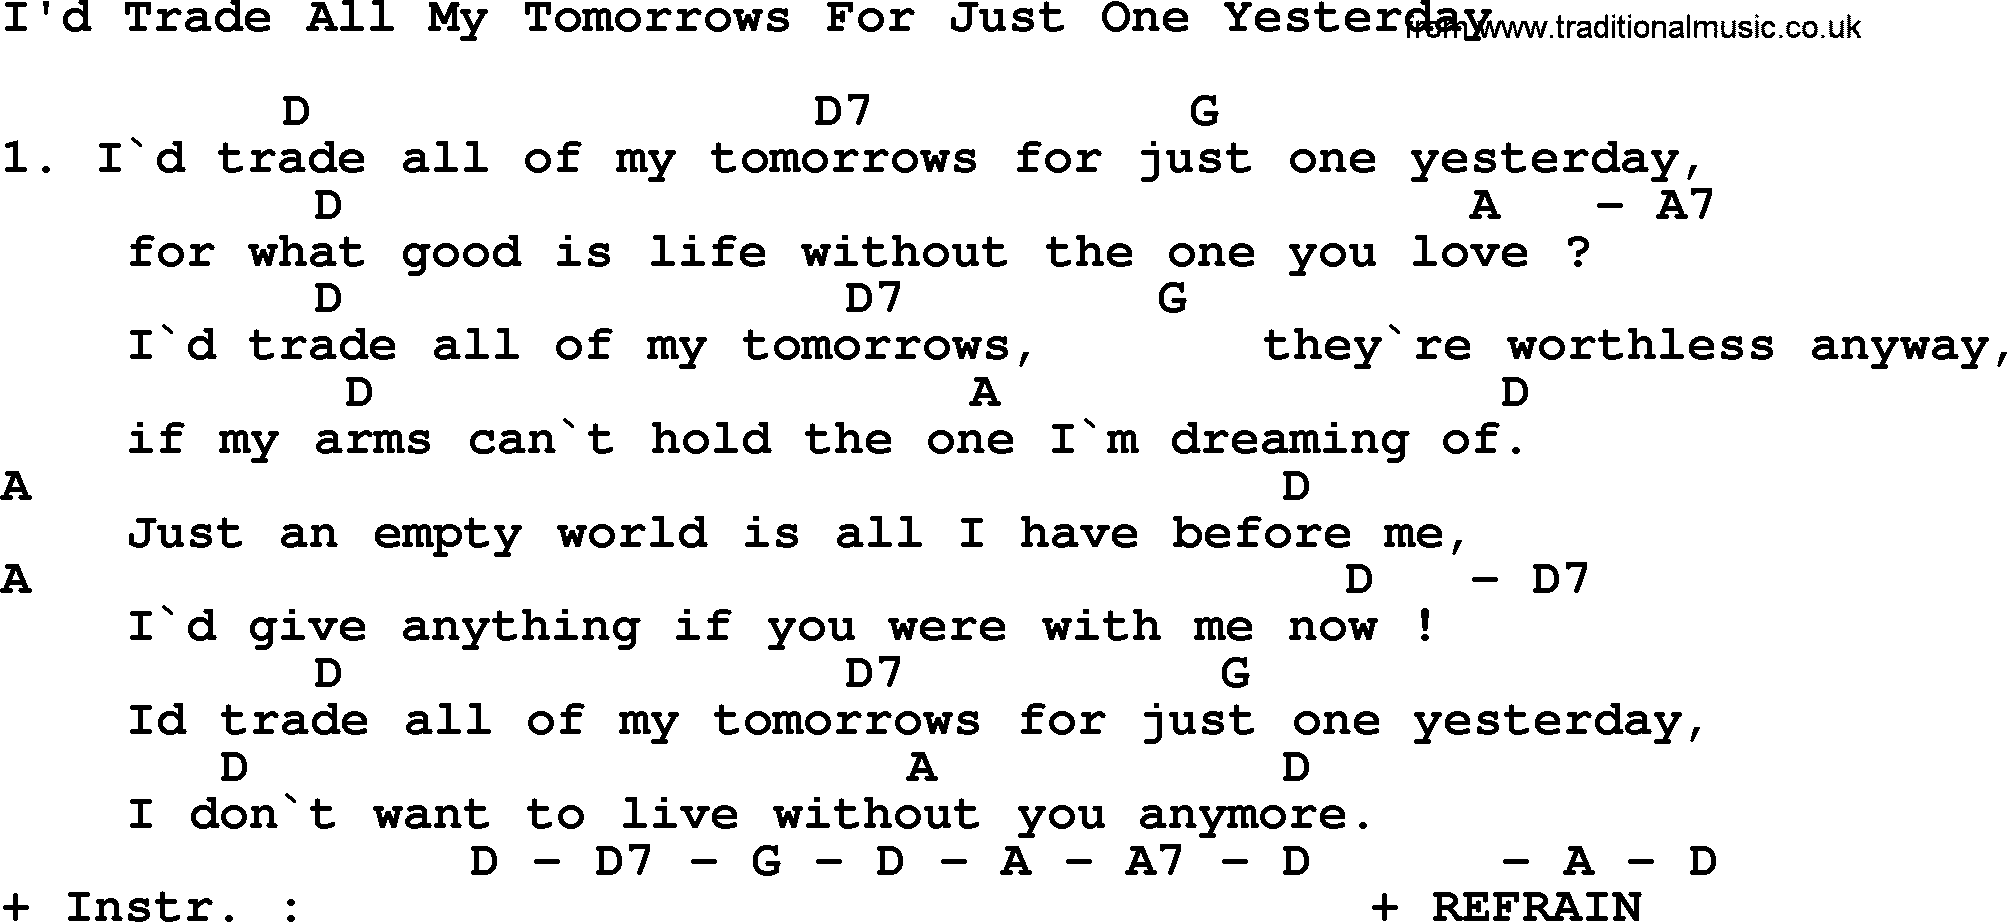 Willie Nelson song: I'd Trade All My Tomorrows For Just One Yesterday, lyrics and chords